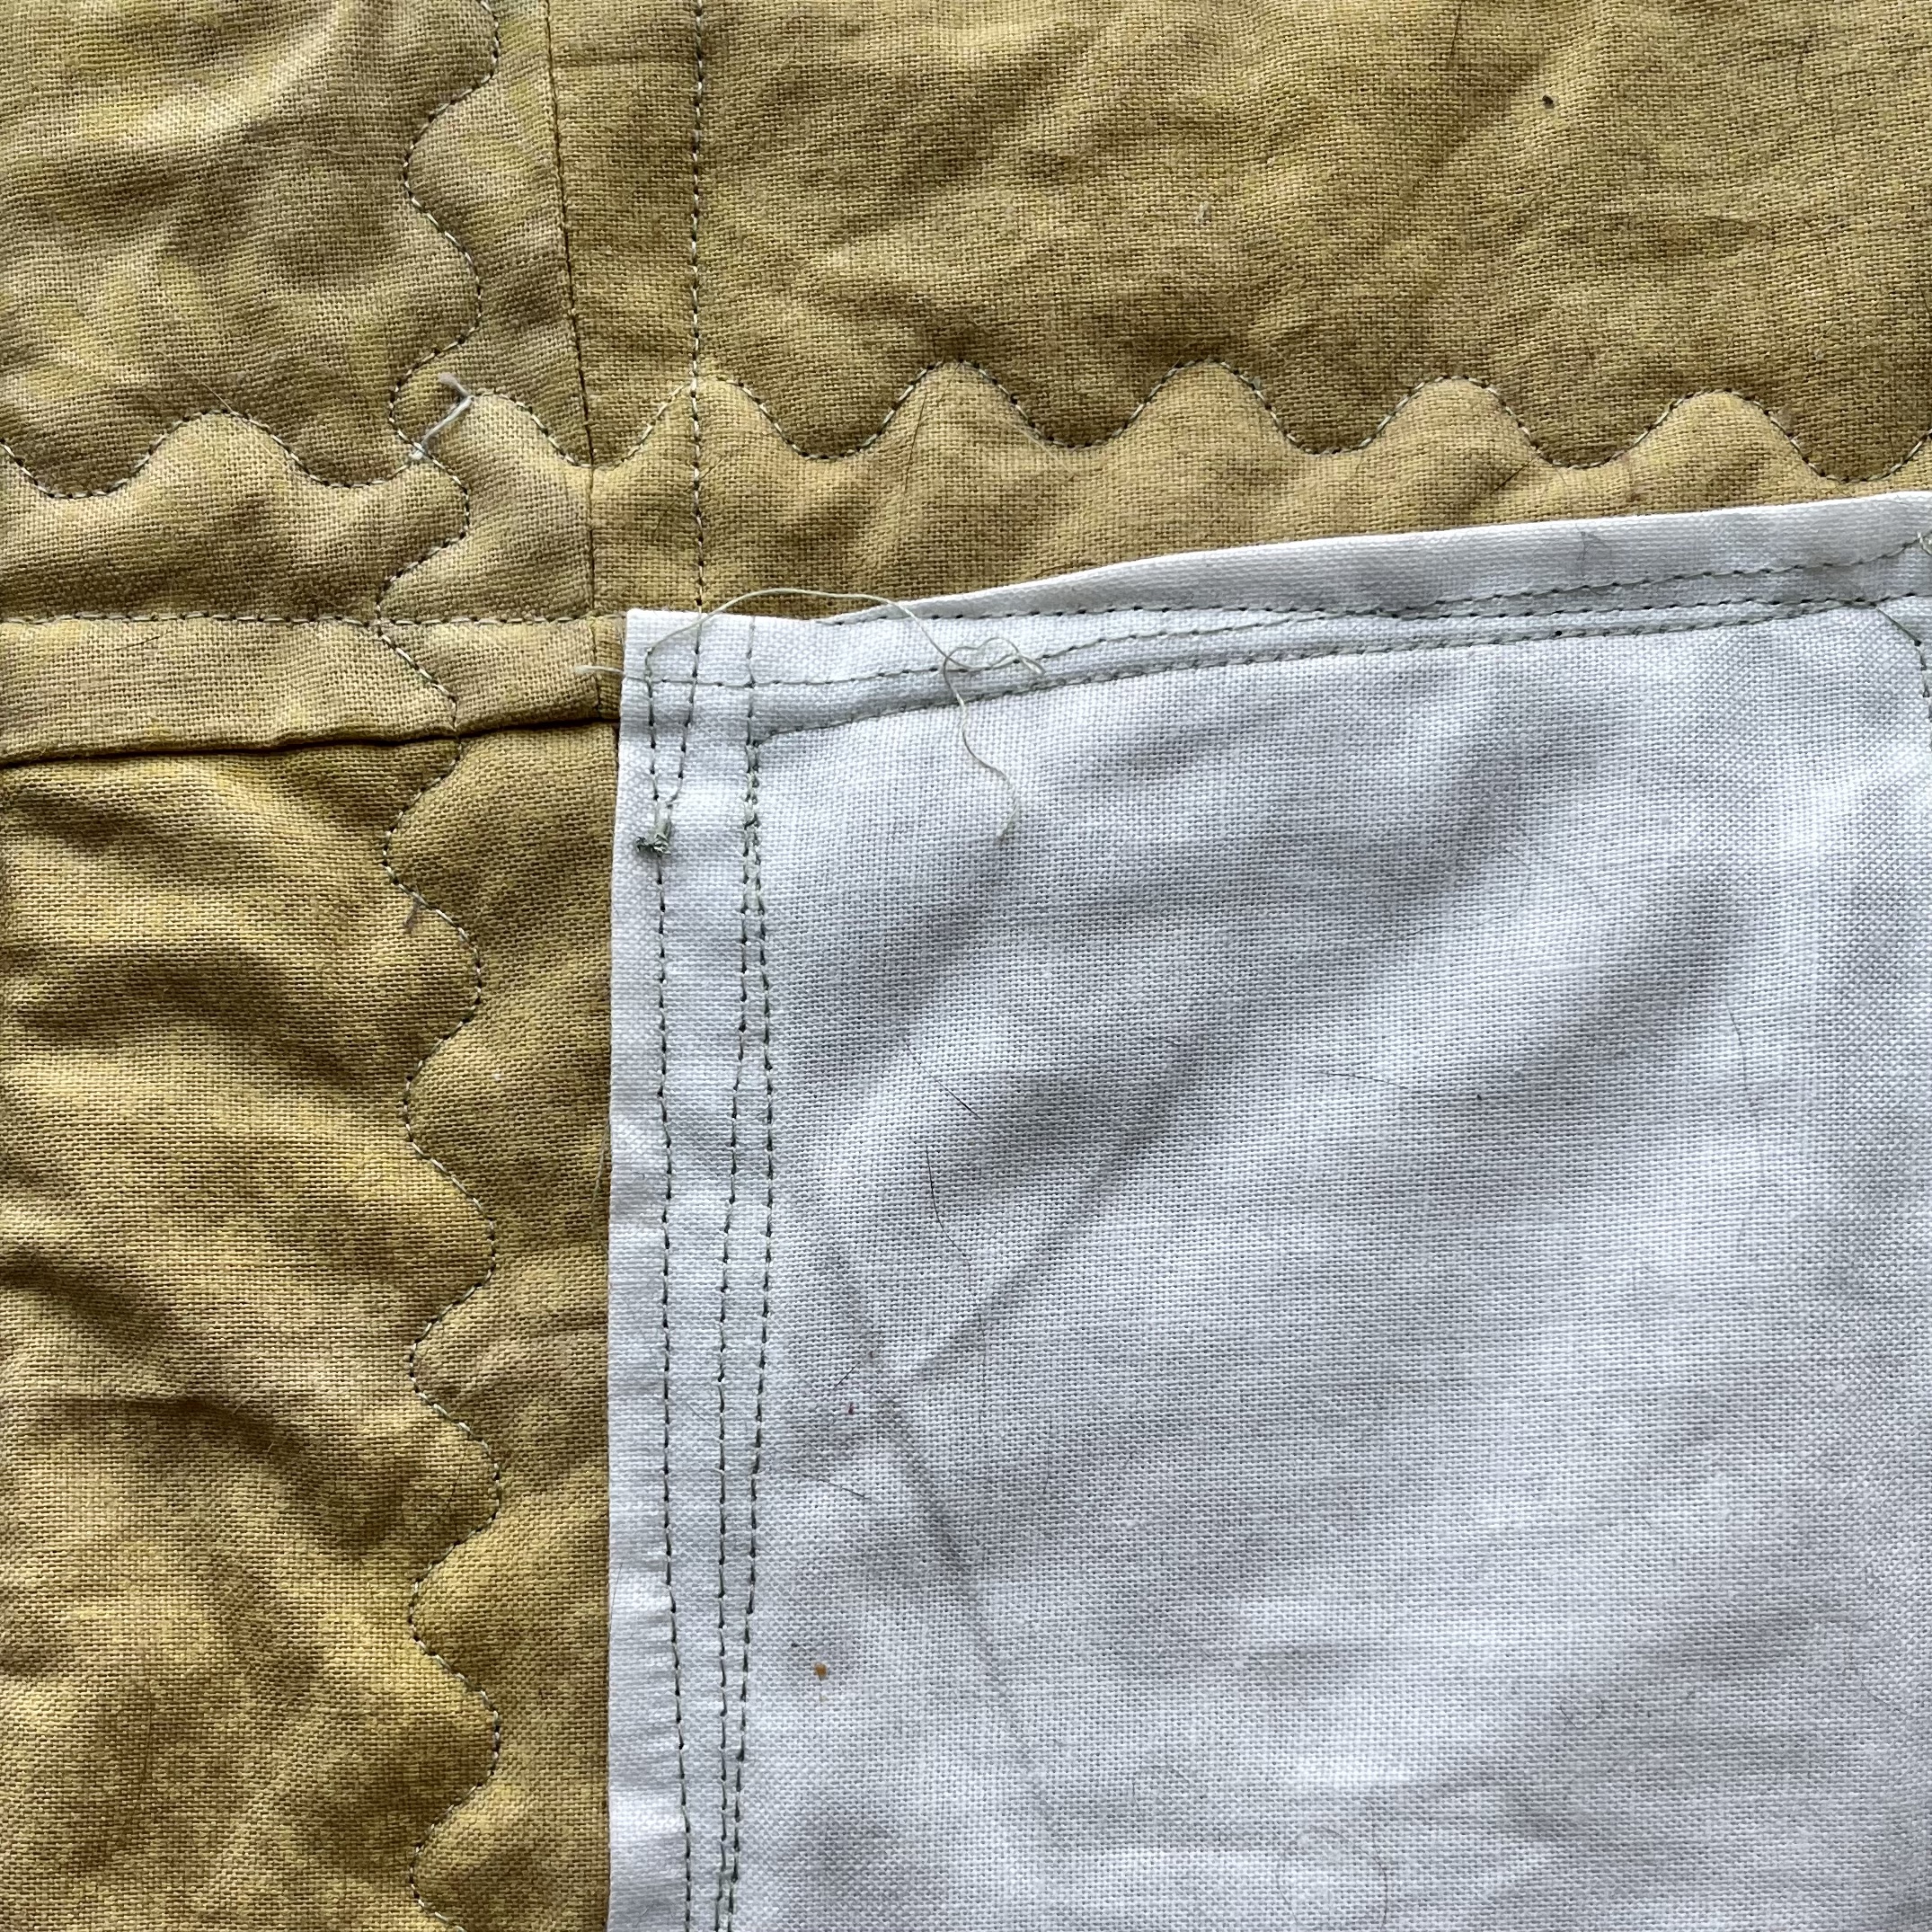 This image shows a closer look at the turmeric-dyed fabric, white pocket, and stitching. The stitching is a light green color. The pocket is stitched on with a straight stitch. The quilt top, batting, and backing are stitched together using a wave pattern. 